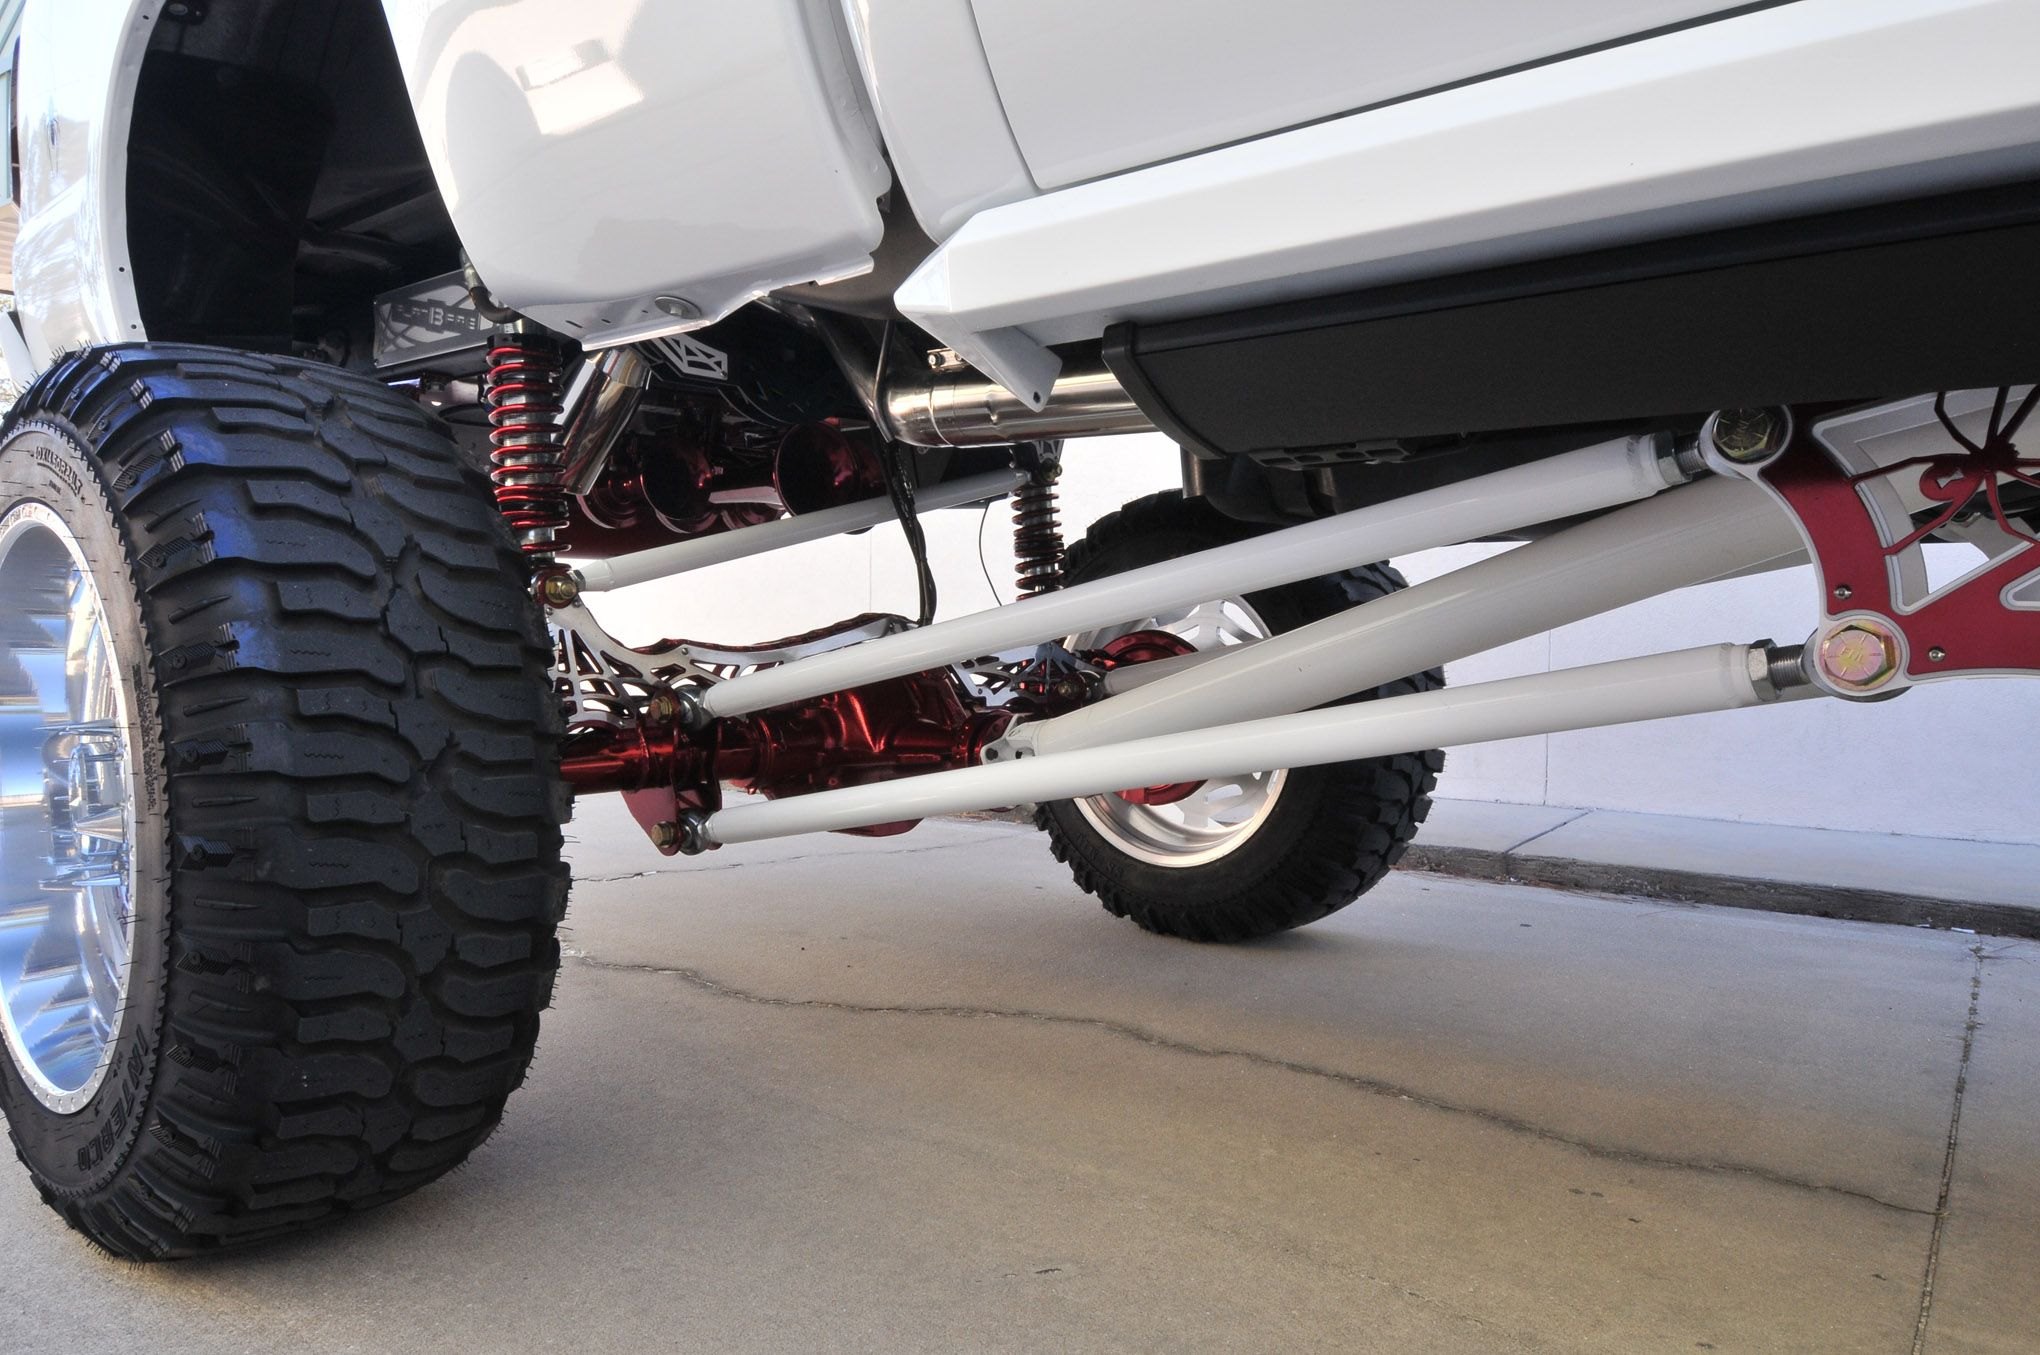 Lollipop Red Suspension Kit on Ford Powerstroke - Photo by Joe Greeves